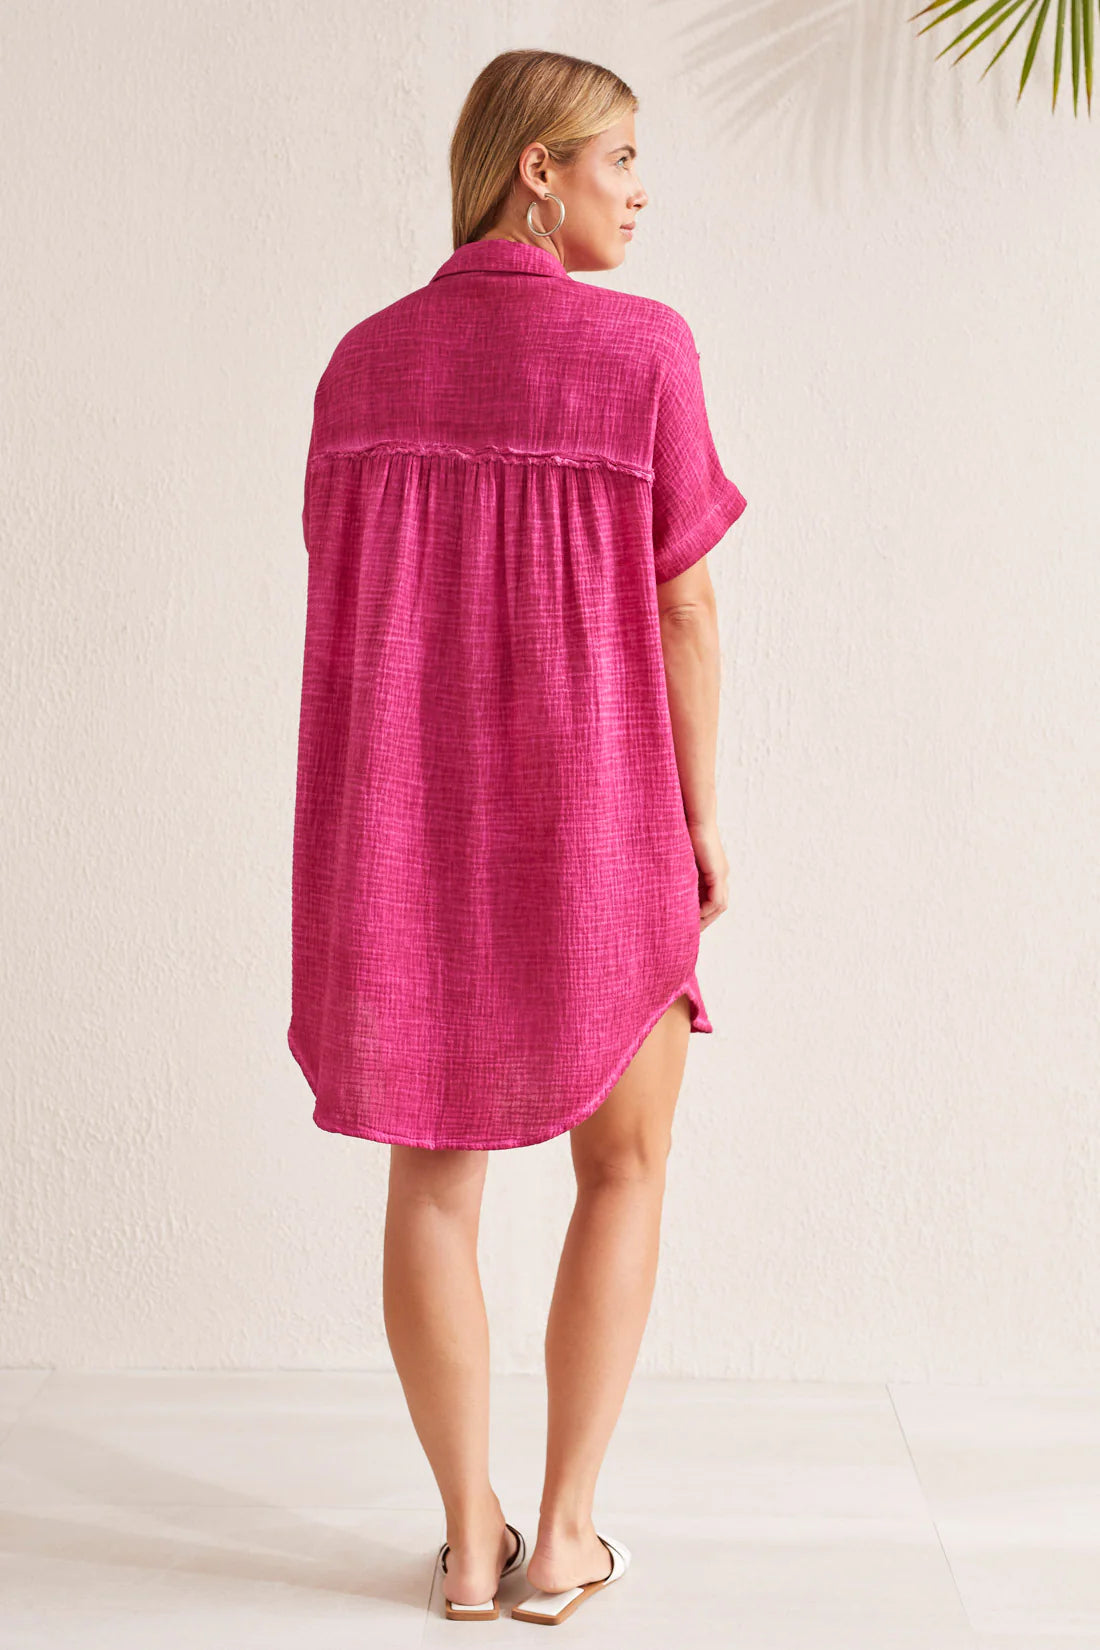 Elevate your sunny day style with this shirt dress made from crinkled gauze fabric that's lightweight and flowy. It stays breezy with a loose fit, short dolman sleeves, a button-up front, and curved high-low hem.